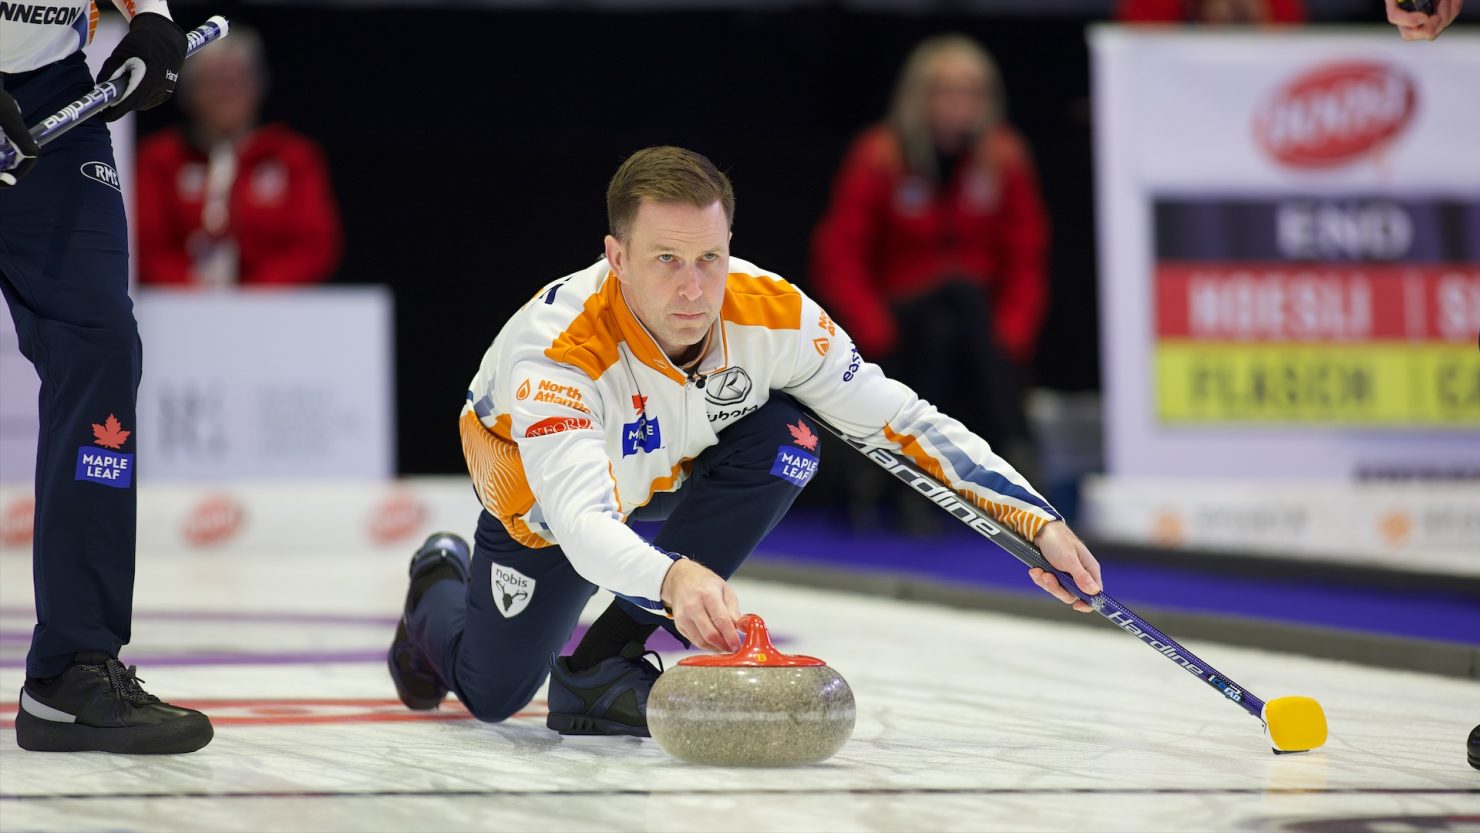 GUSHUE, EDIN TO FACE OFF FOR BOOST NATIONAL MEN'S TITLE